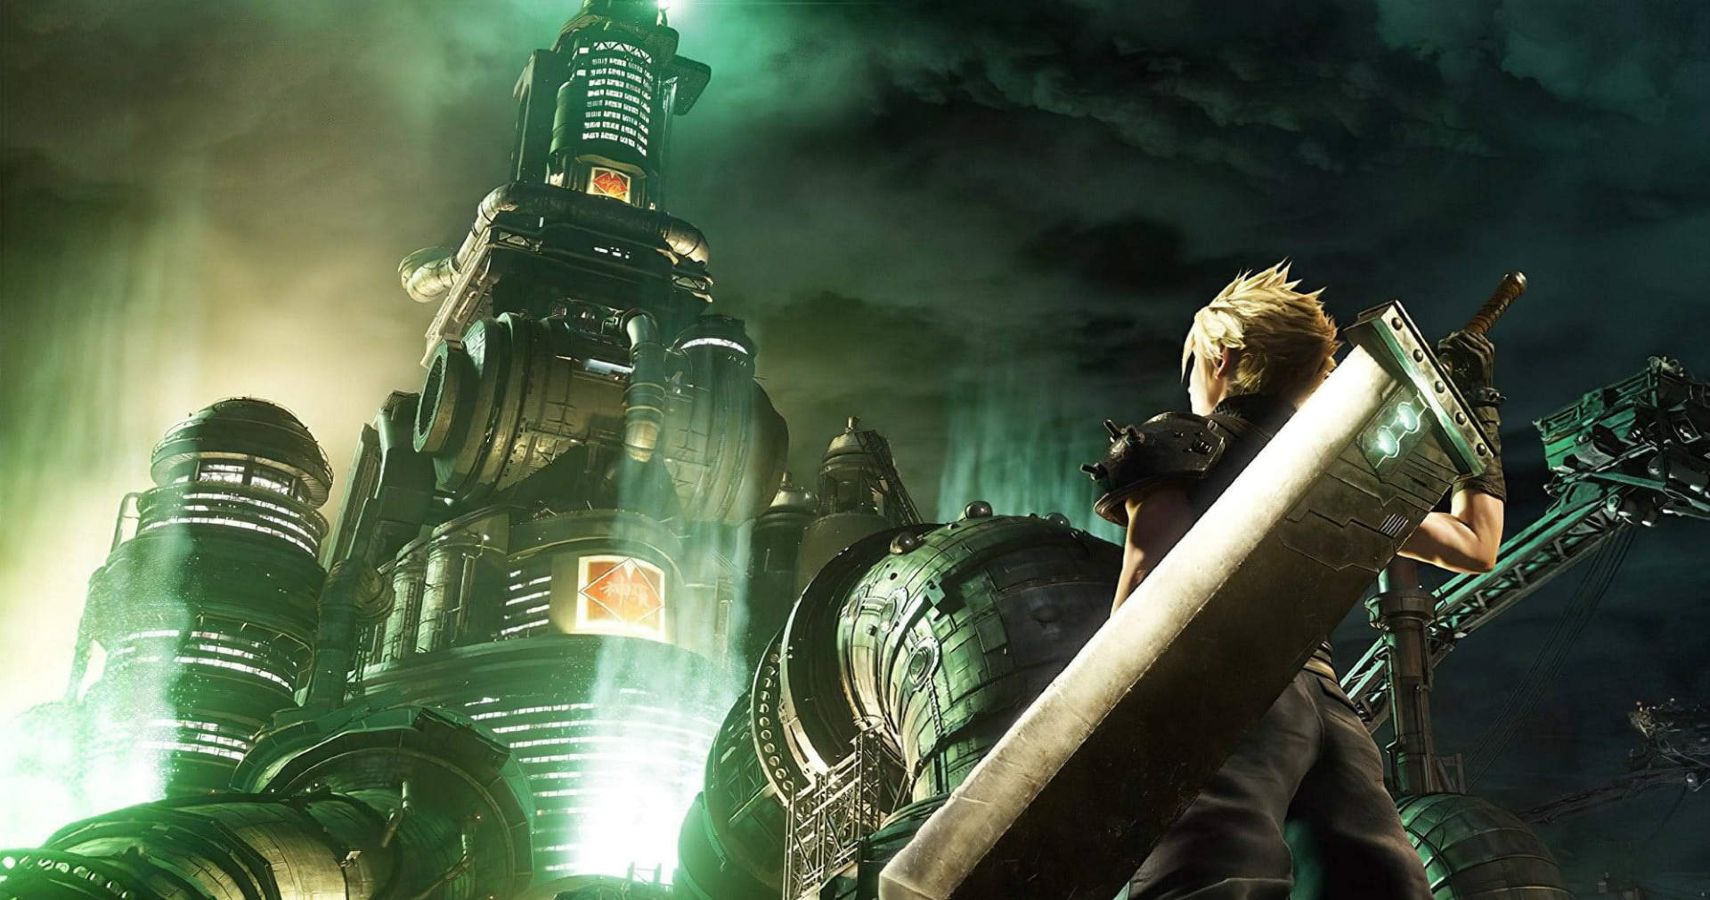 ff7 tower of the ancients